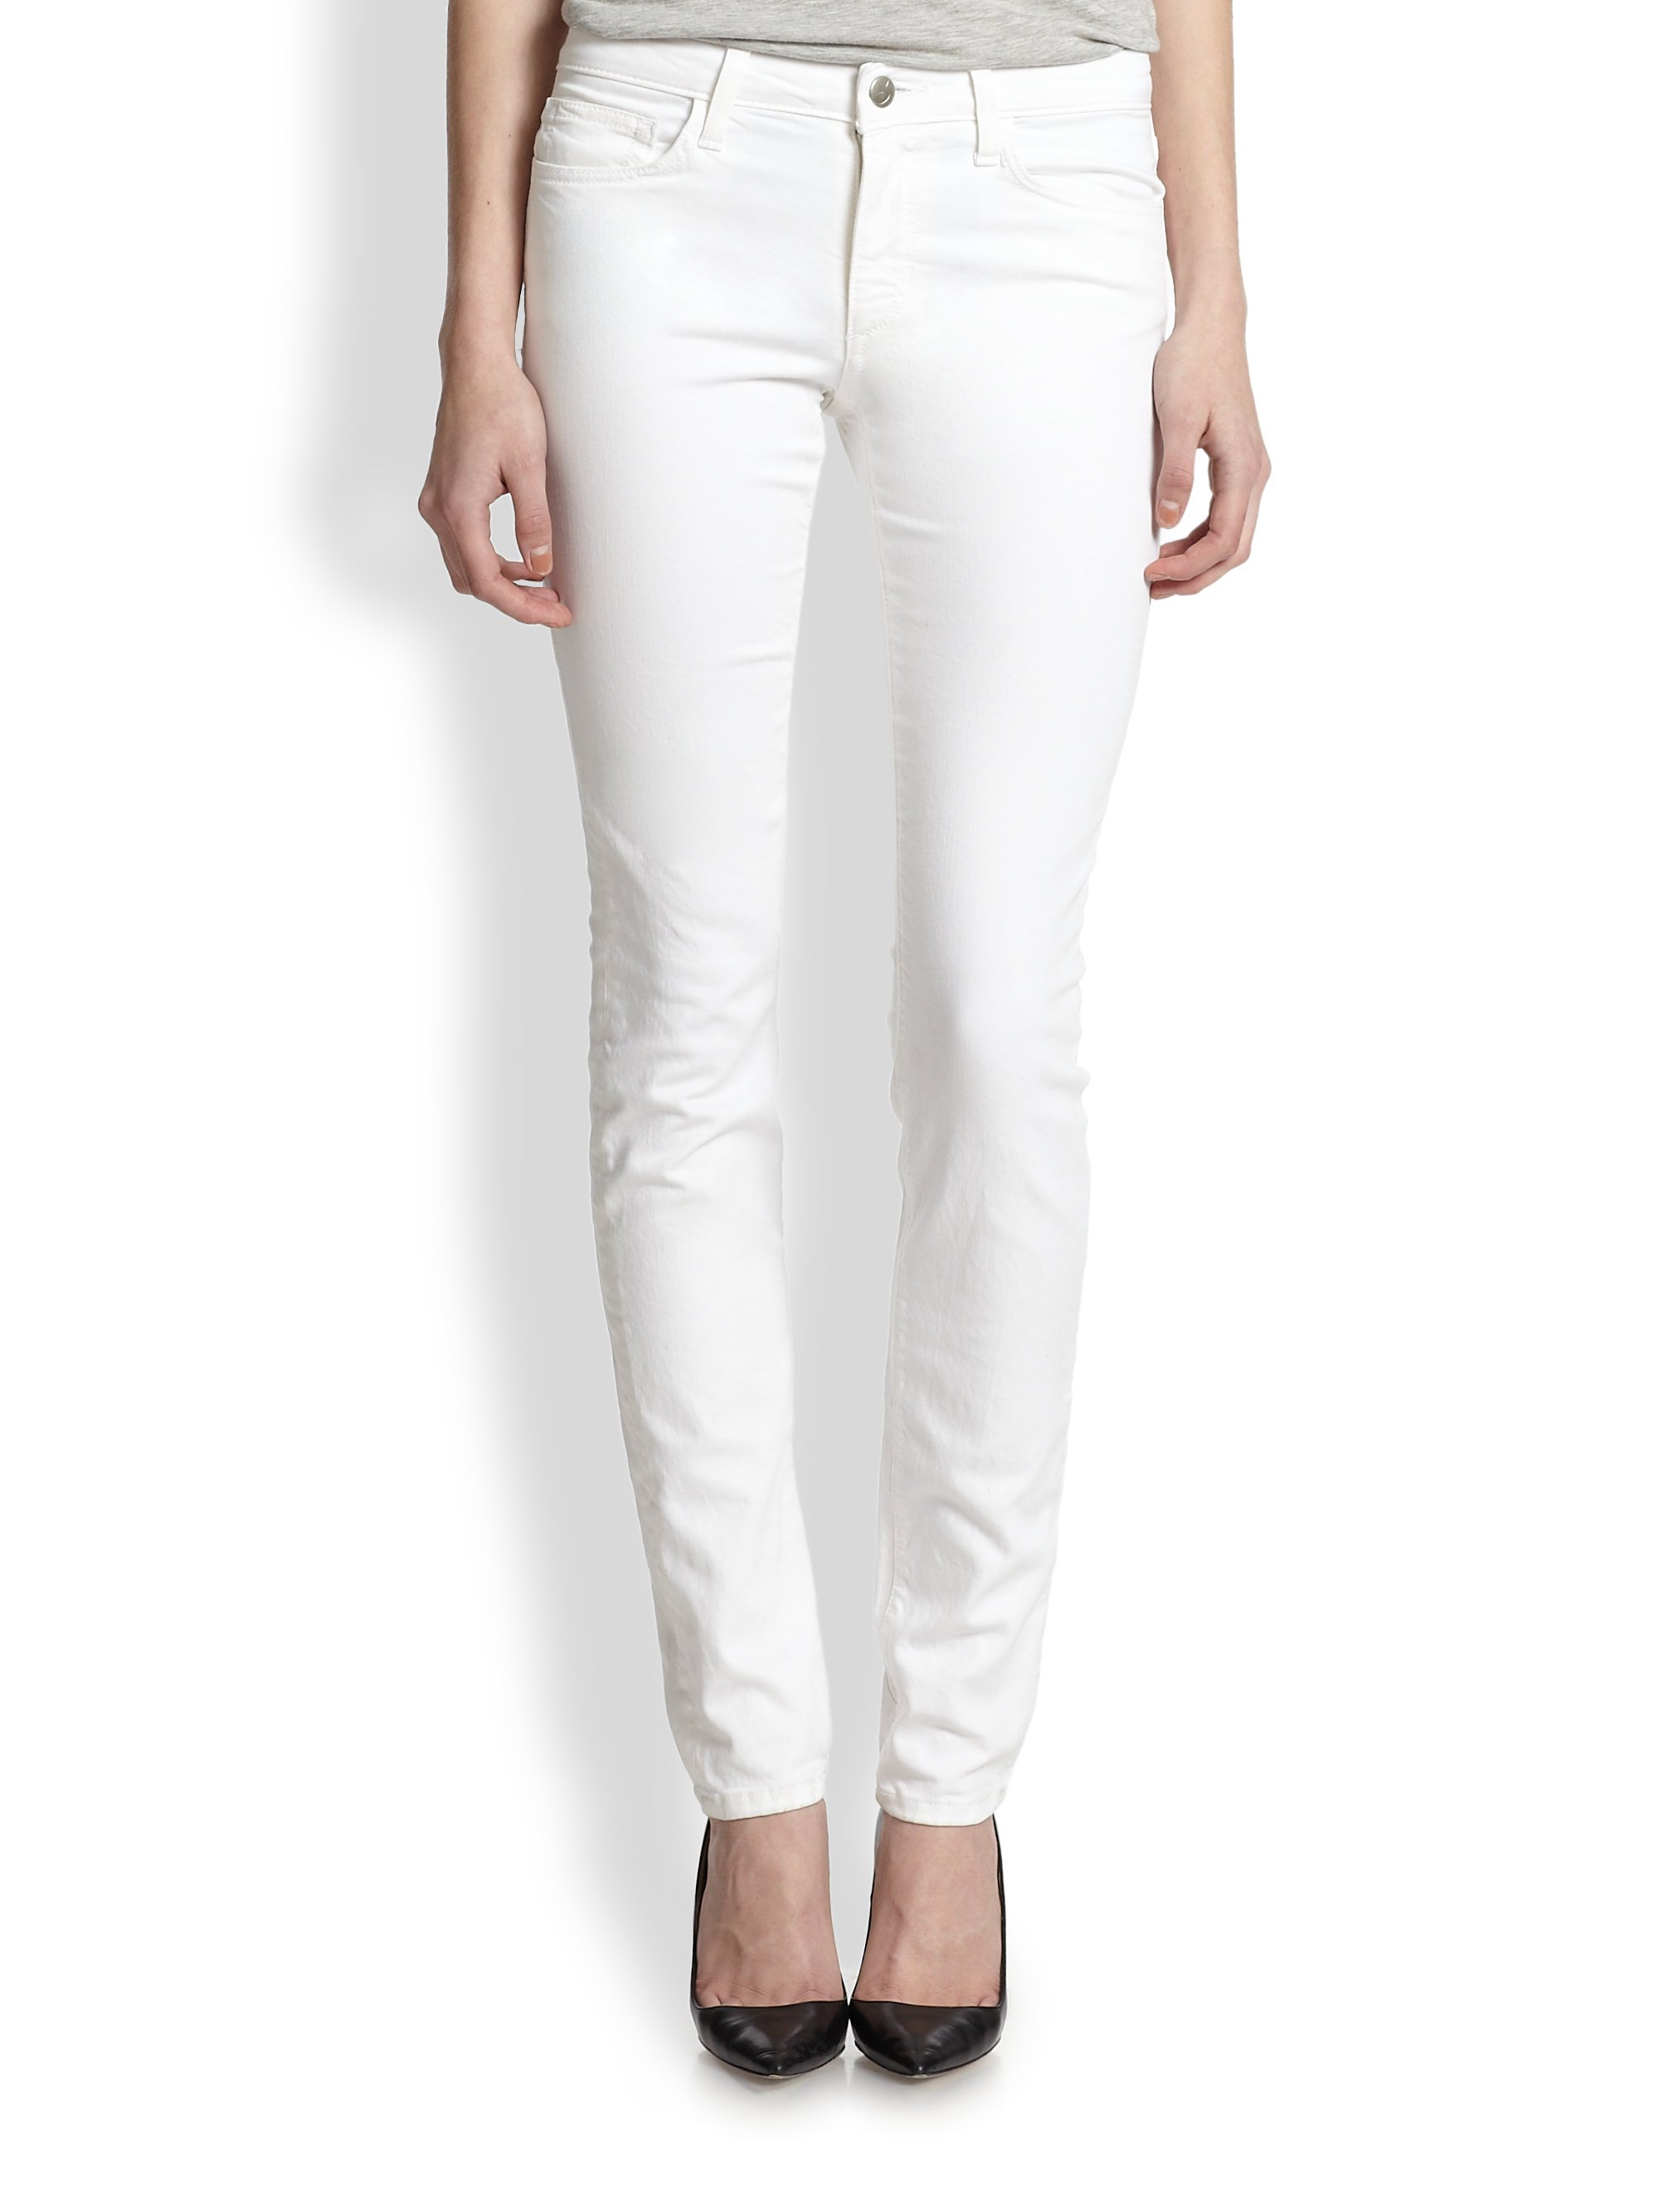 Joe's jeans Annie Stay Spotless Skinny Jeans in White | Lyst